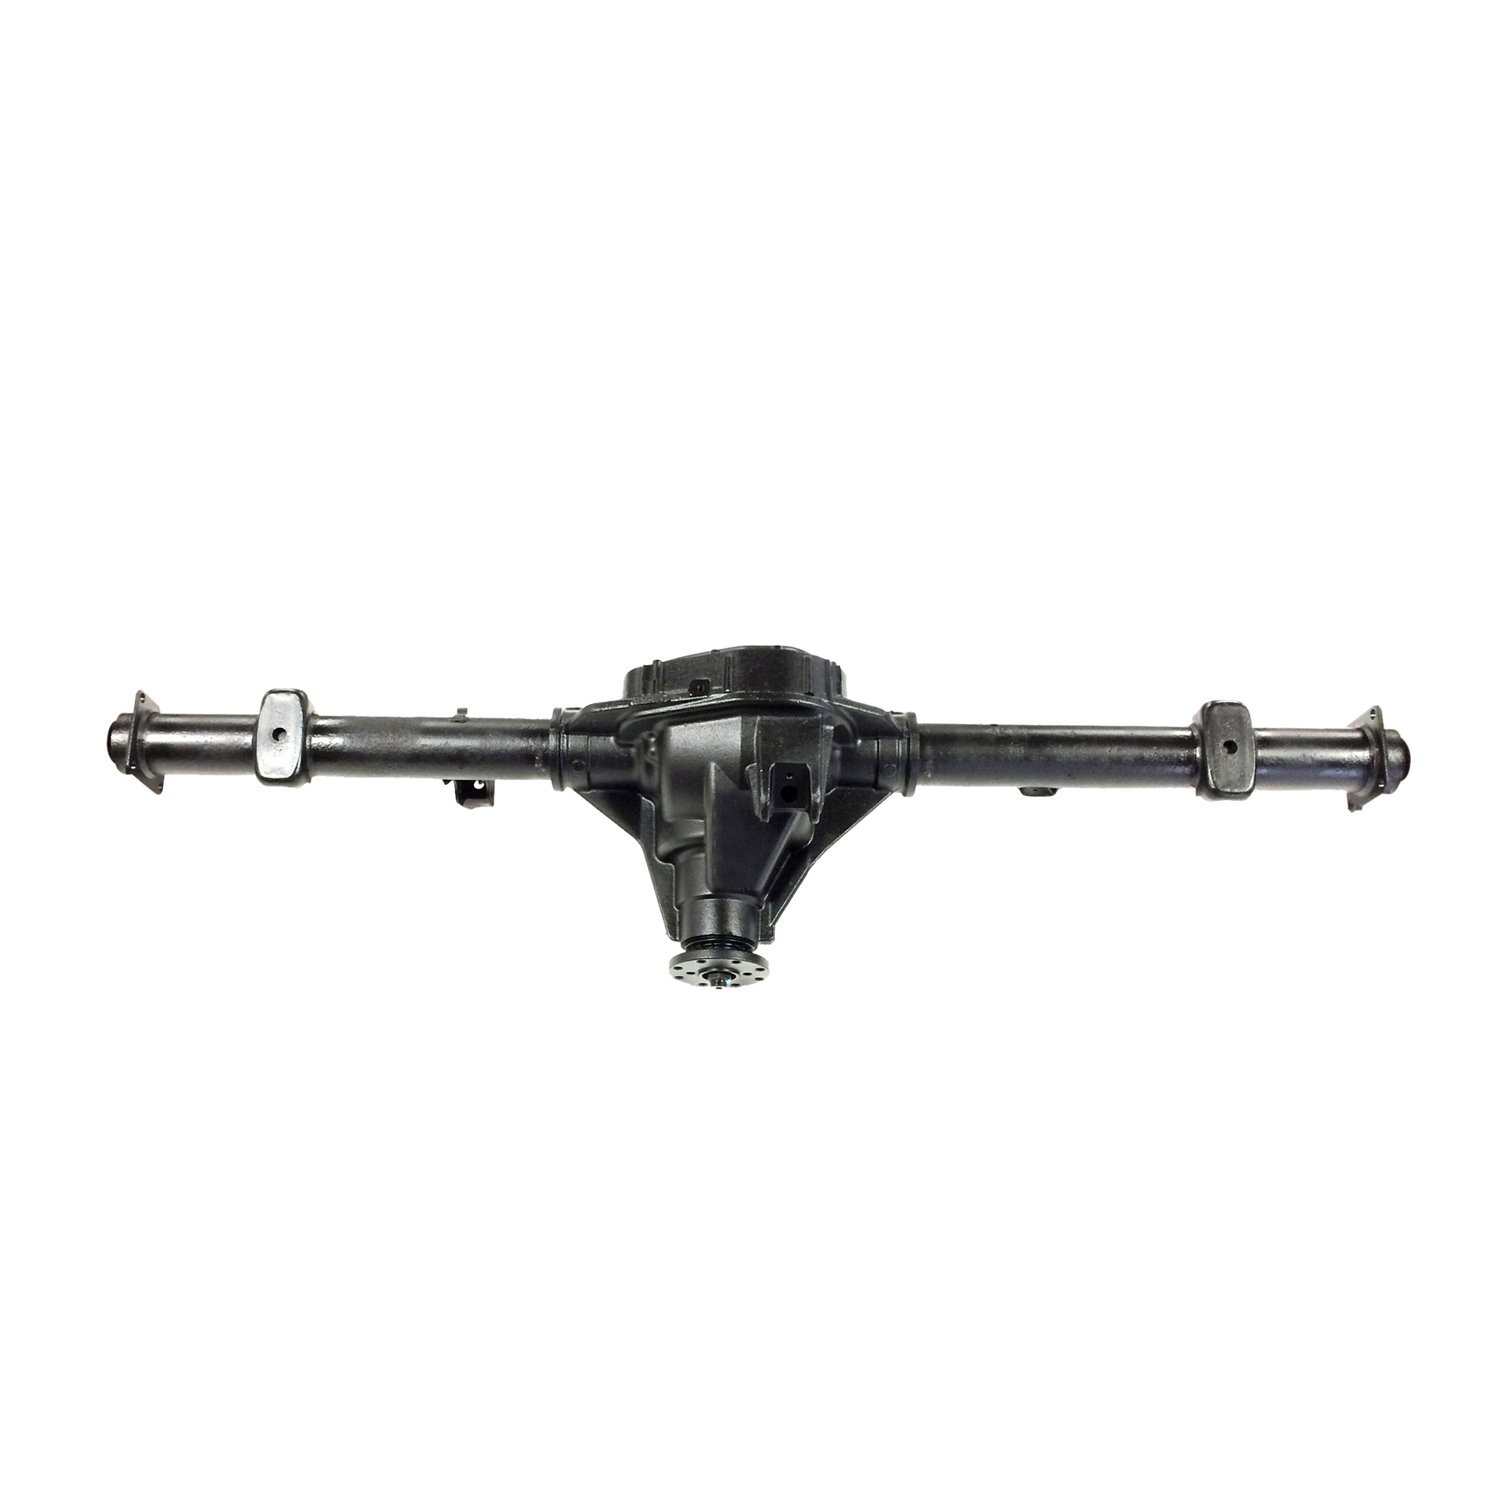 Remanufactured Complete Axle Assy for 9.75" 2011 F150 4.11 , 6 Lug with Electric Locker